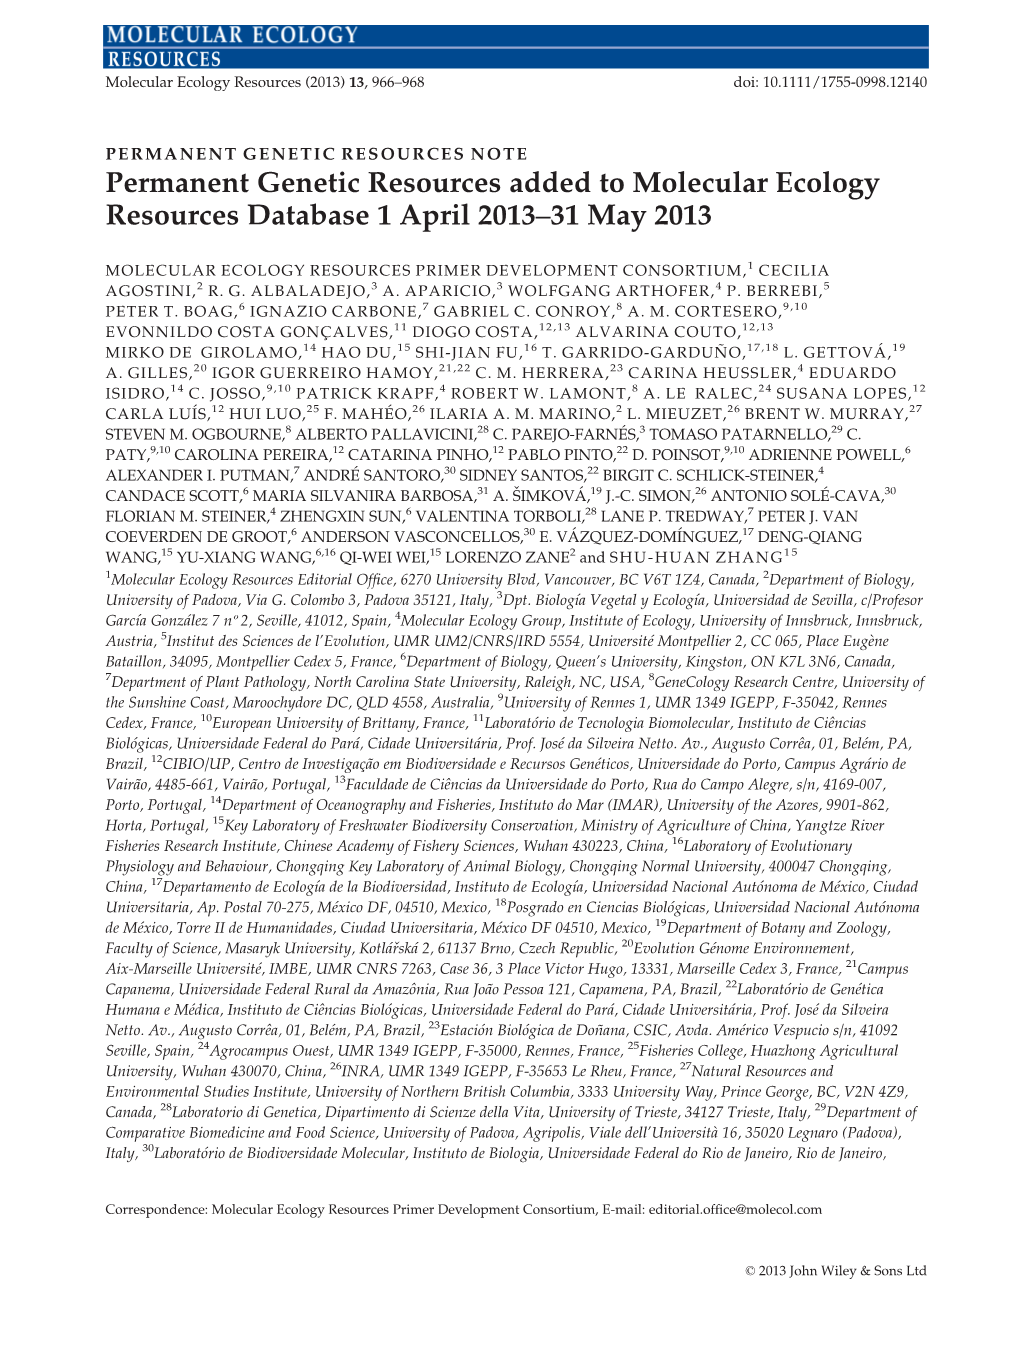 Permanent Genetic Resources Added to Molecular Ecology Resources Database 1 April 2013–31 May 2013